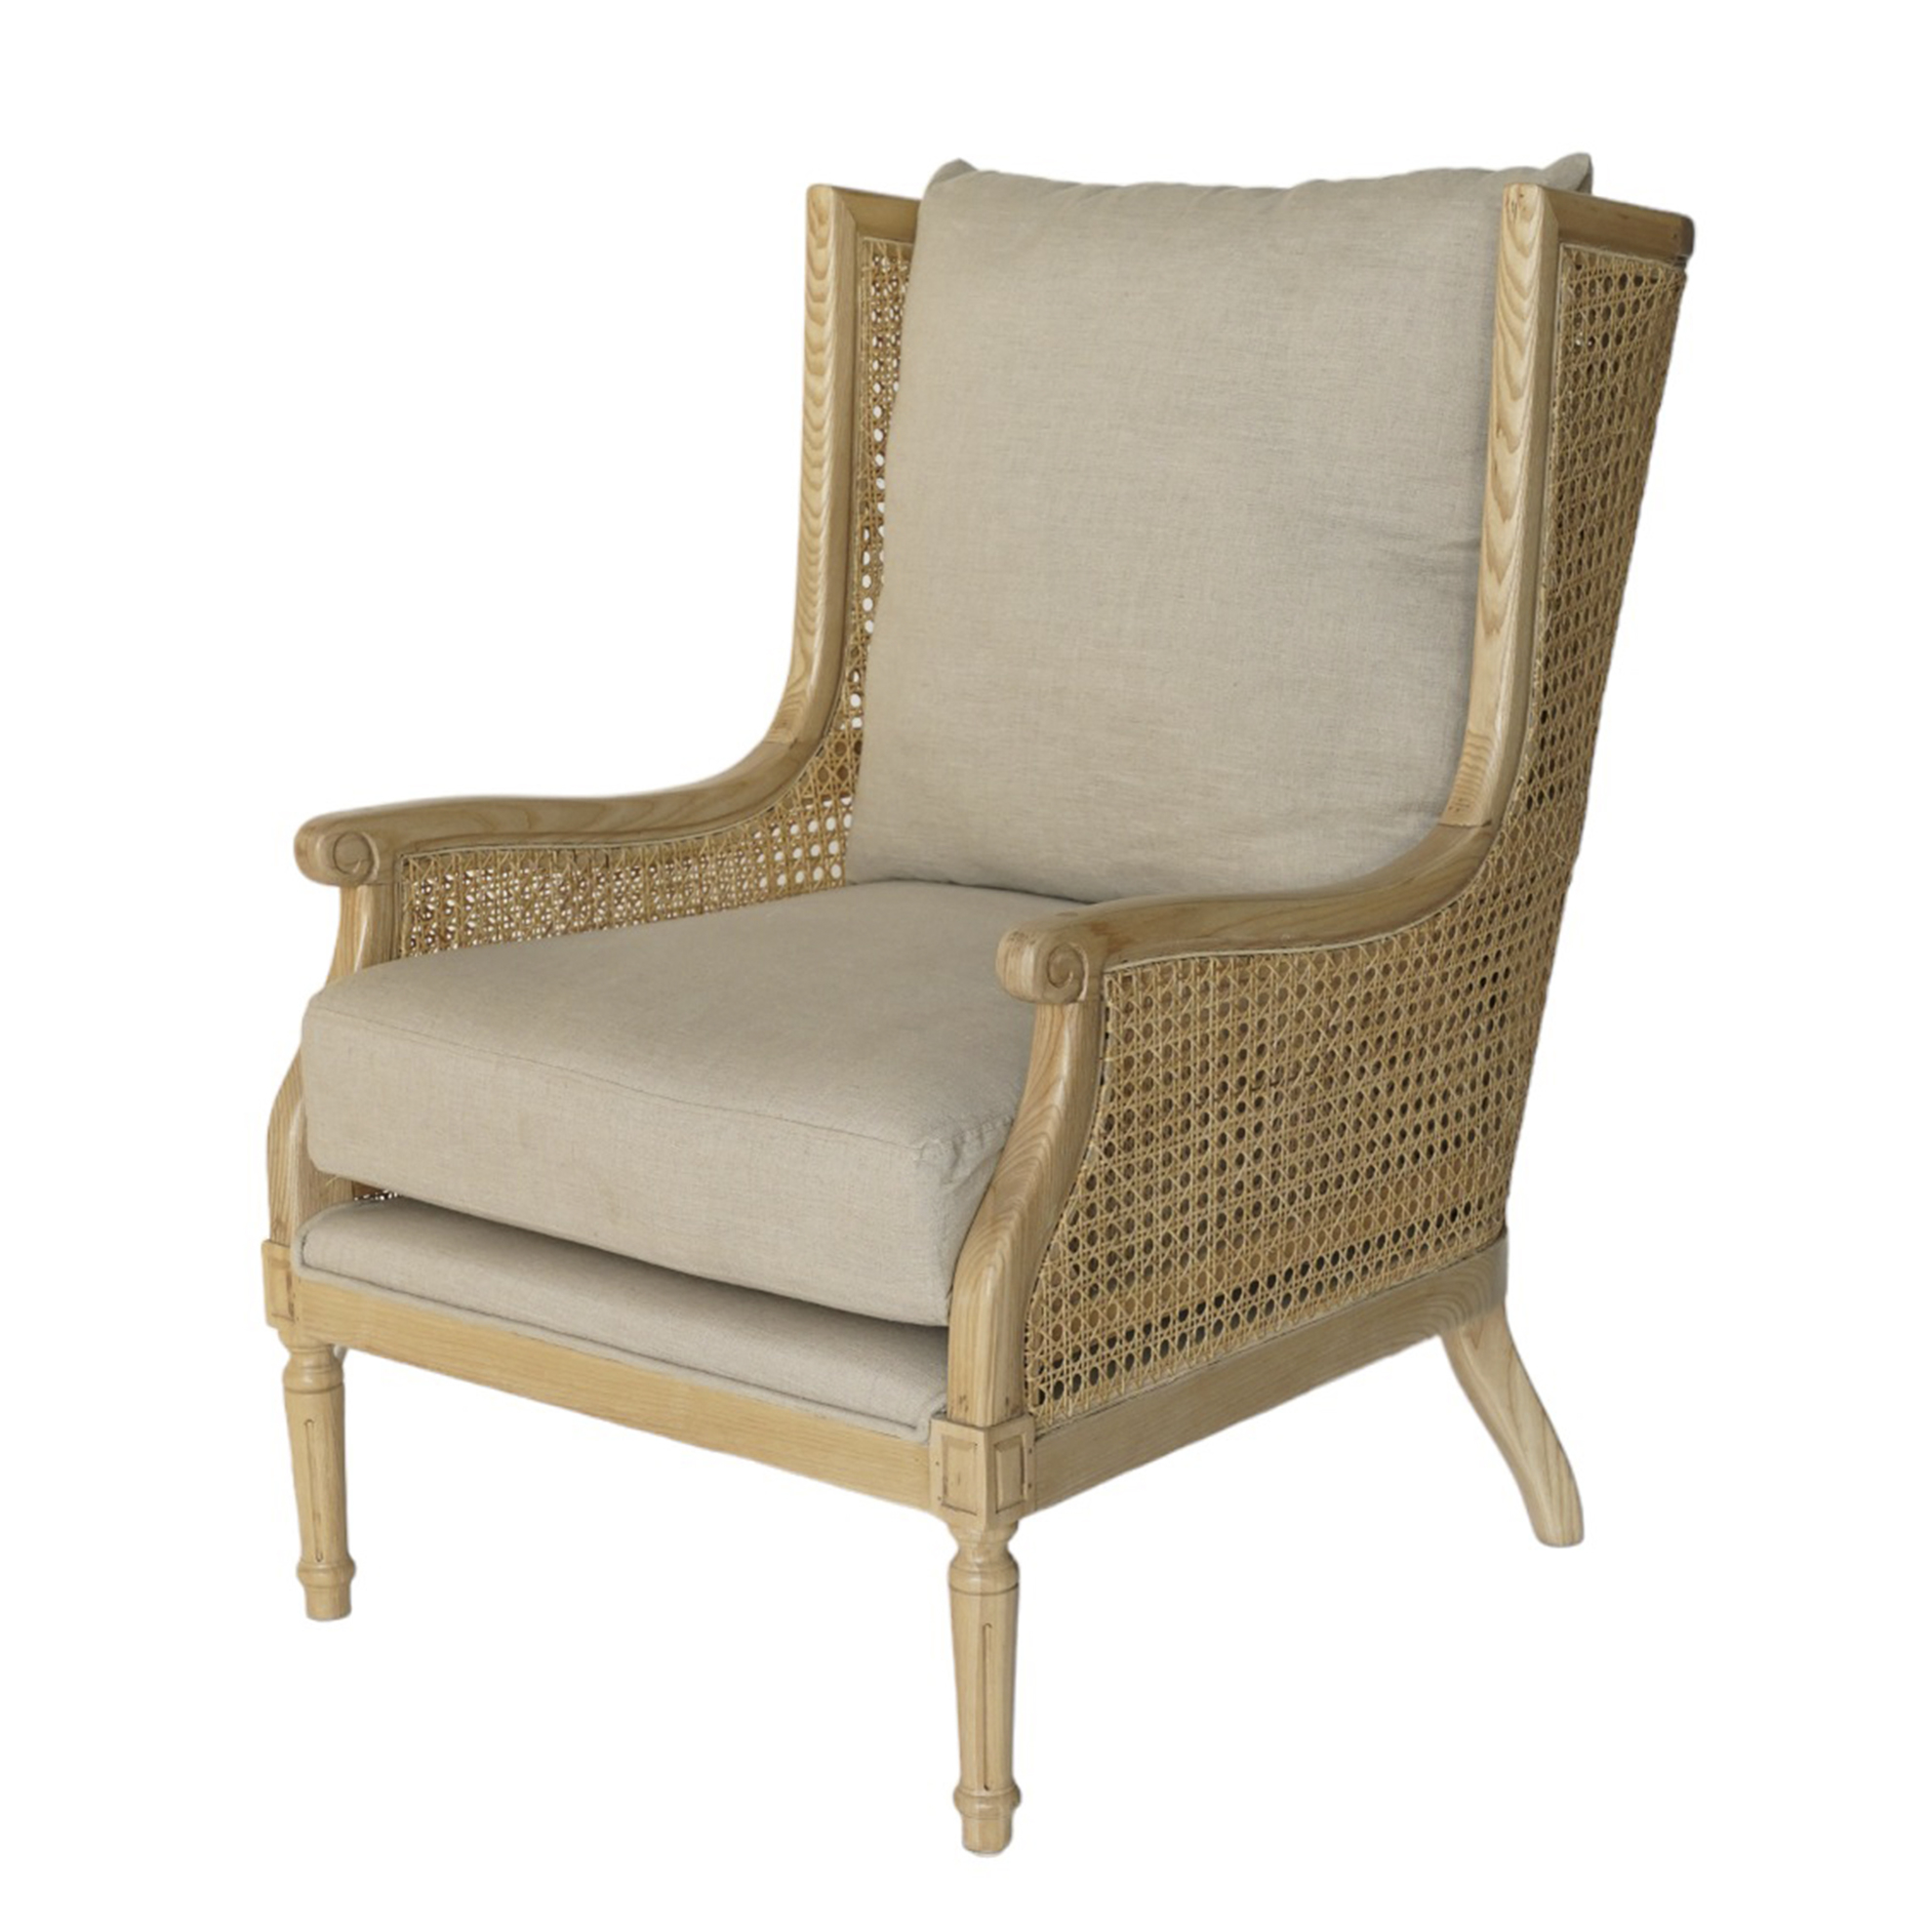 The kashth Bamboo Designer Upholstered Arm Chair with Cane